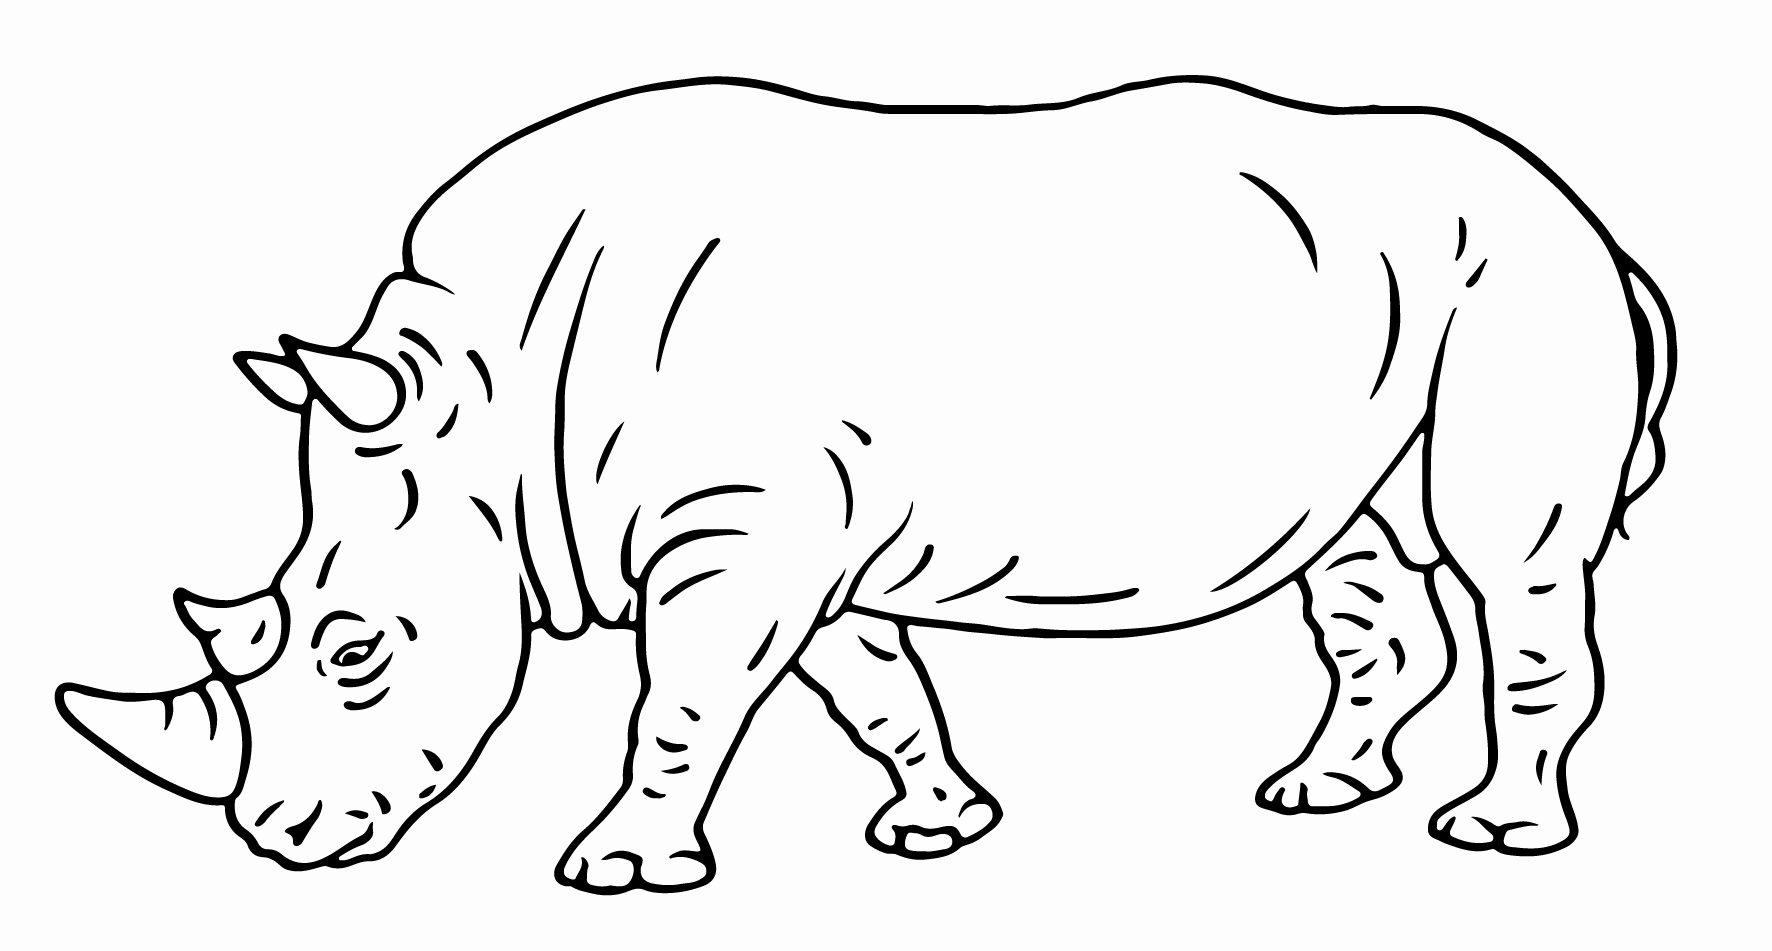 African rhino. African two horn rhino outline clipart drawing illustration free downlaod